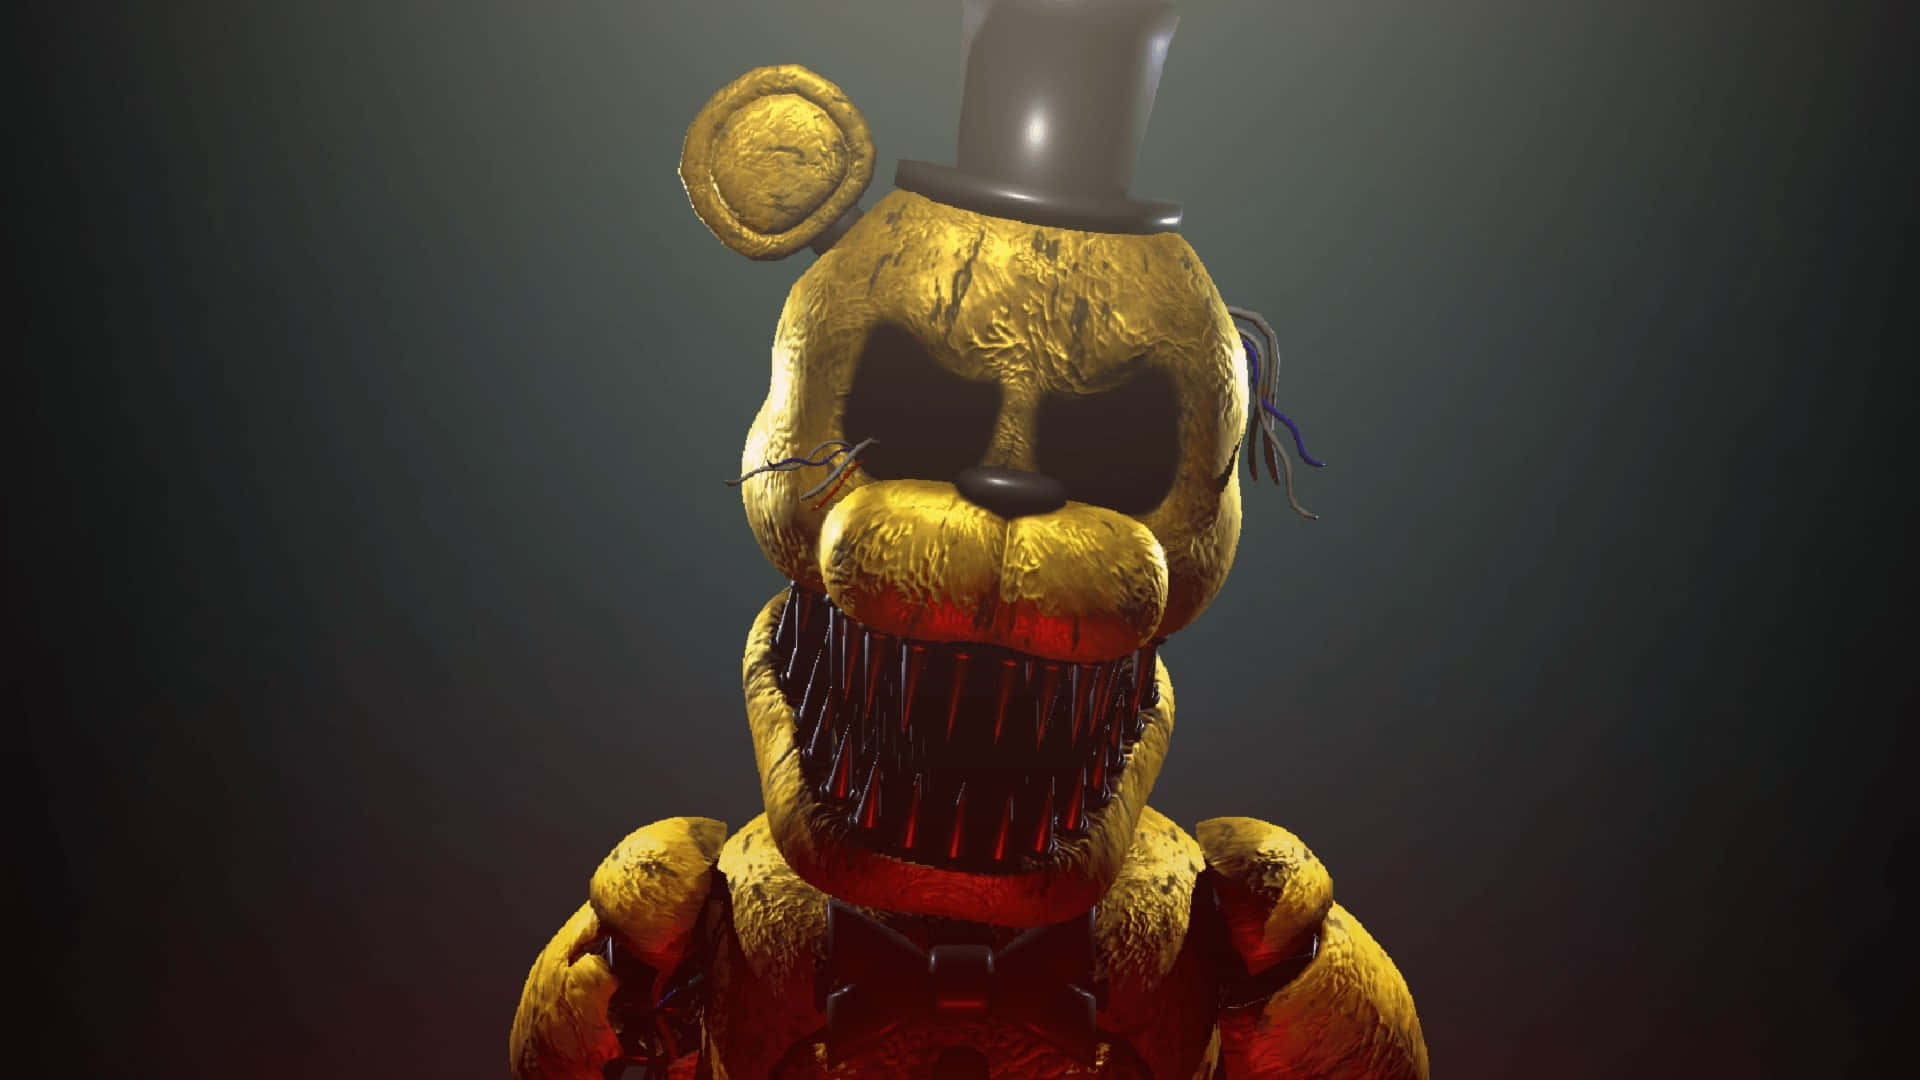 Pokemon Withered Golden Freddy 5